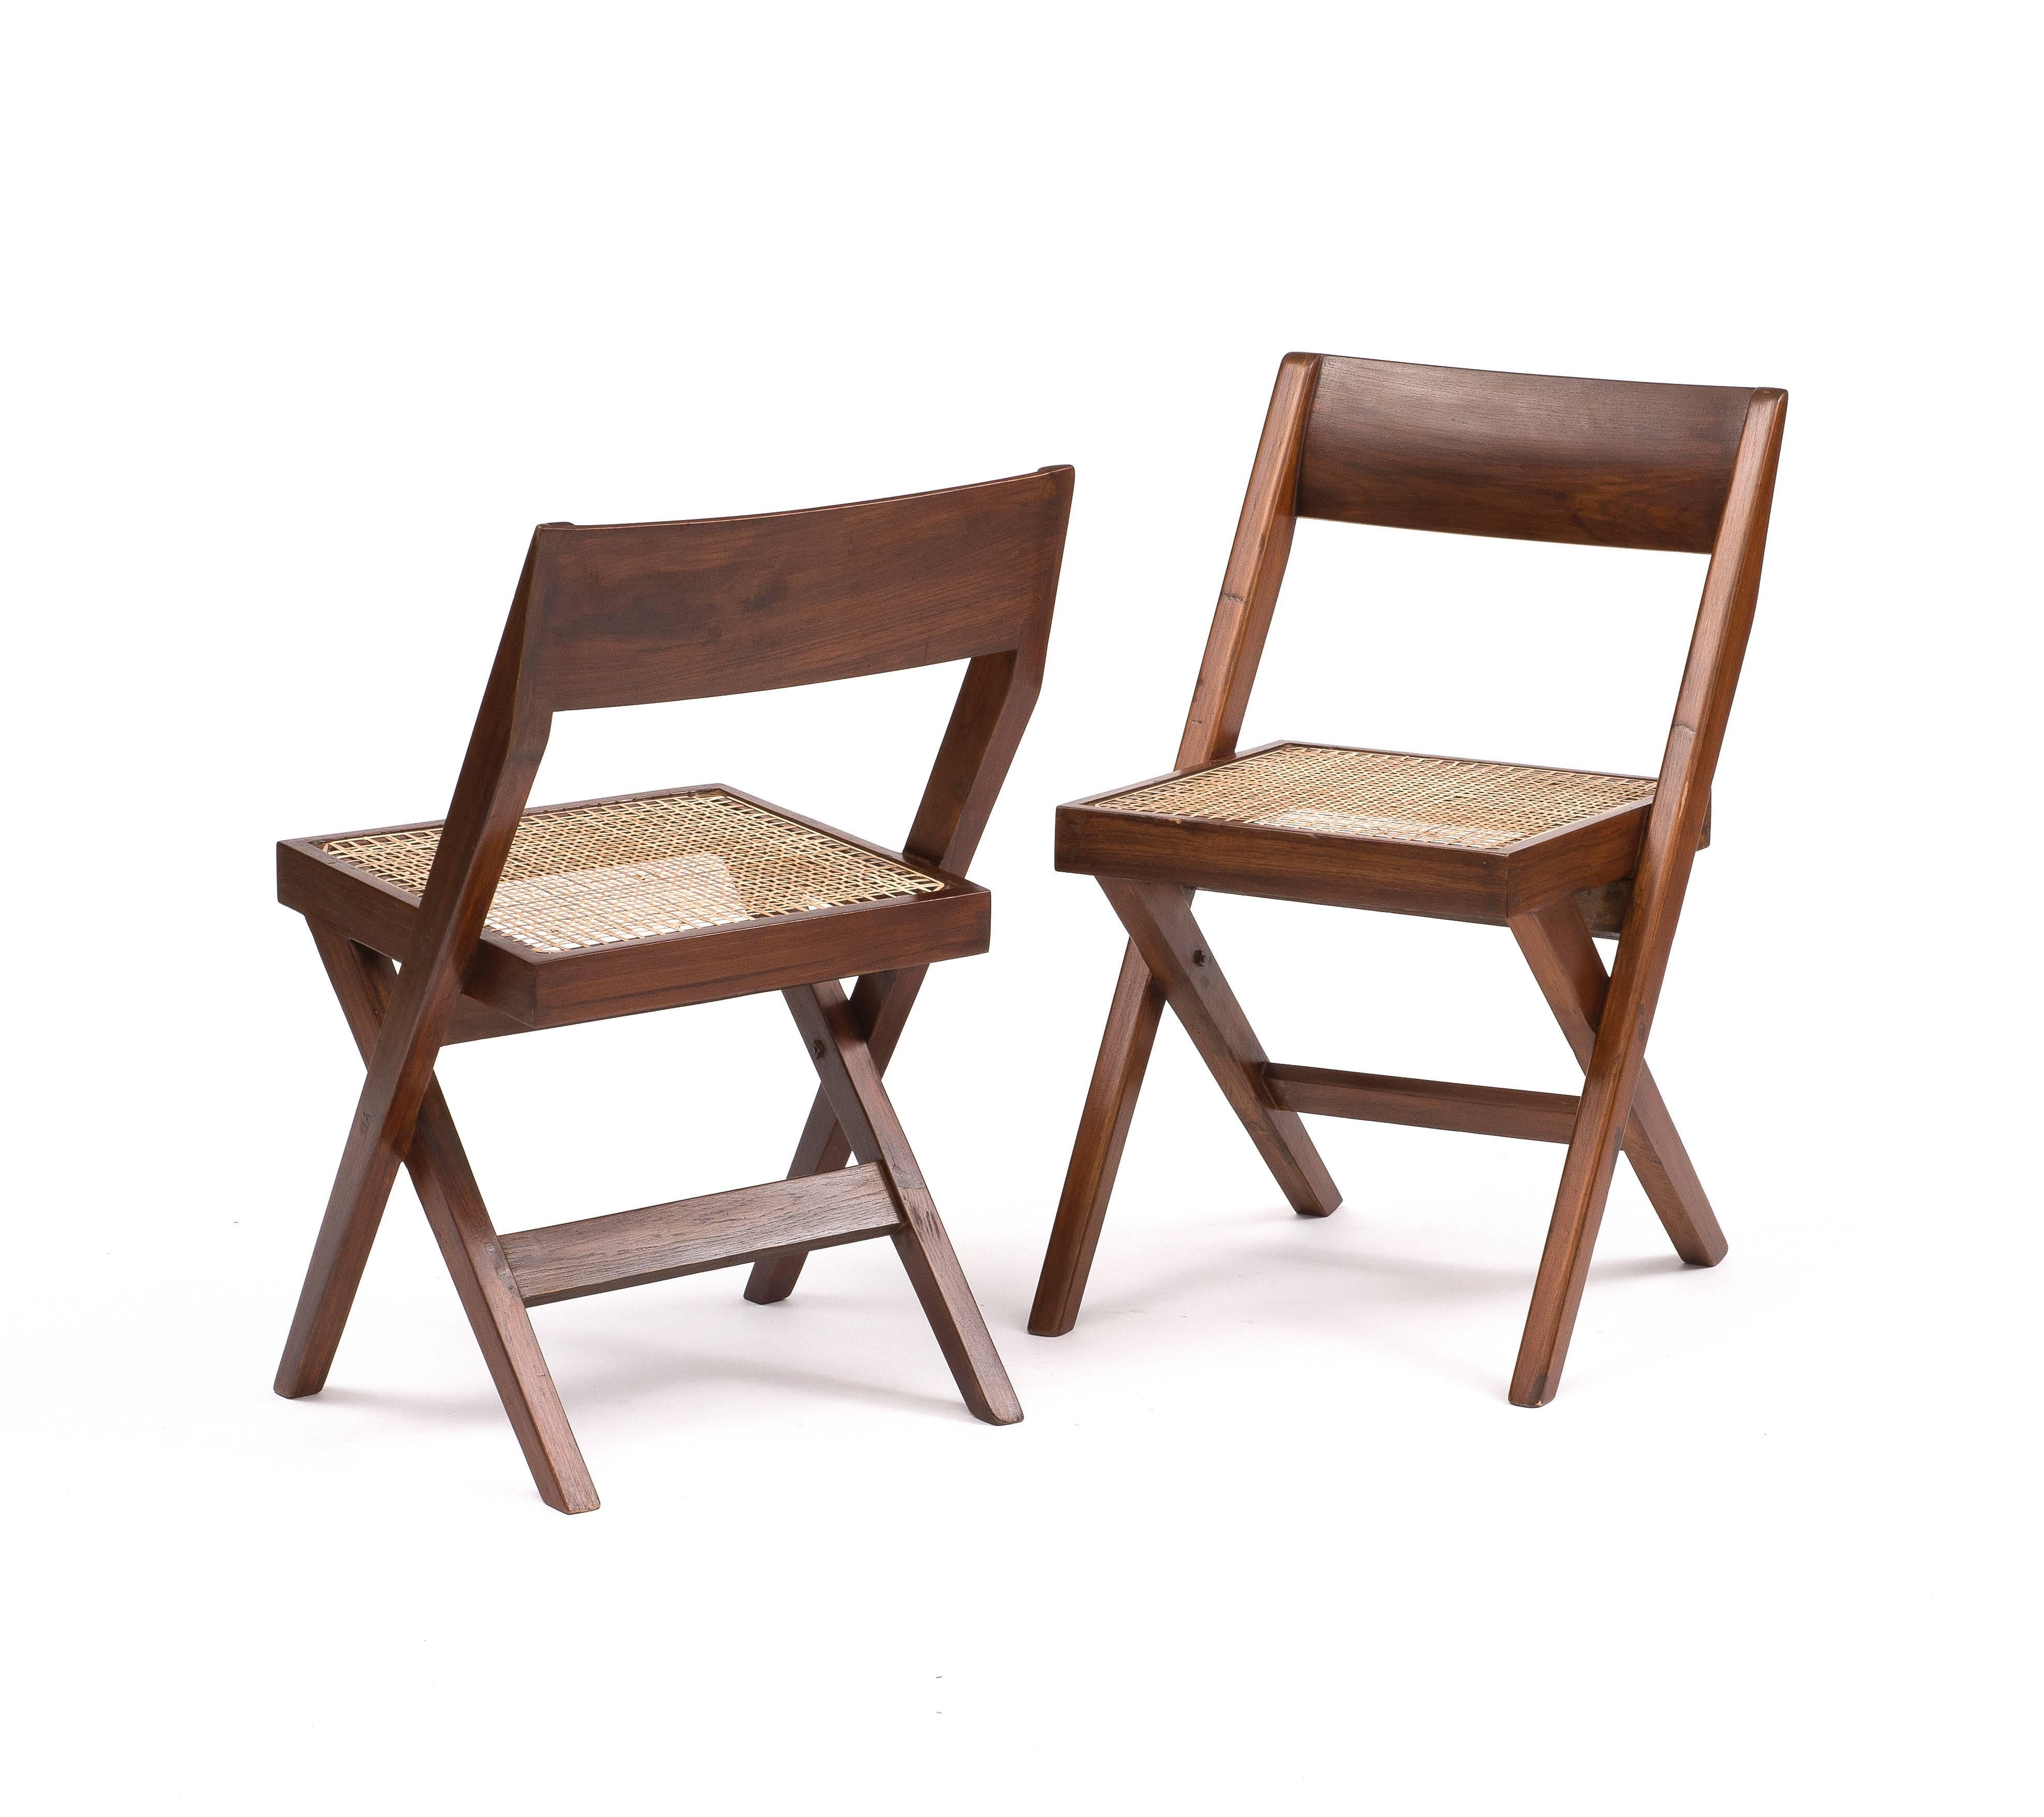 A set of six library chairs in teak and cane by Pierre Jeanneret for Chandigarh, 1950. Cushions included.